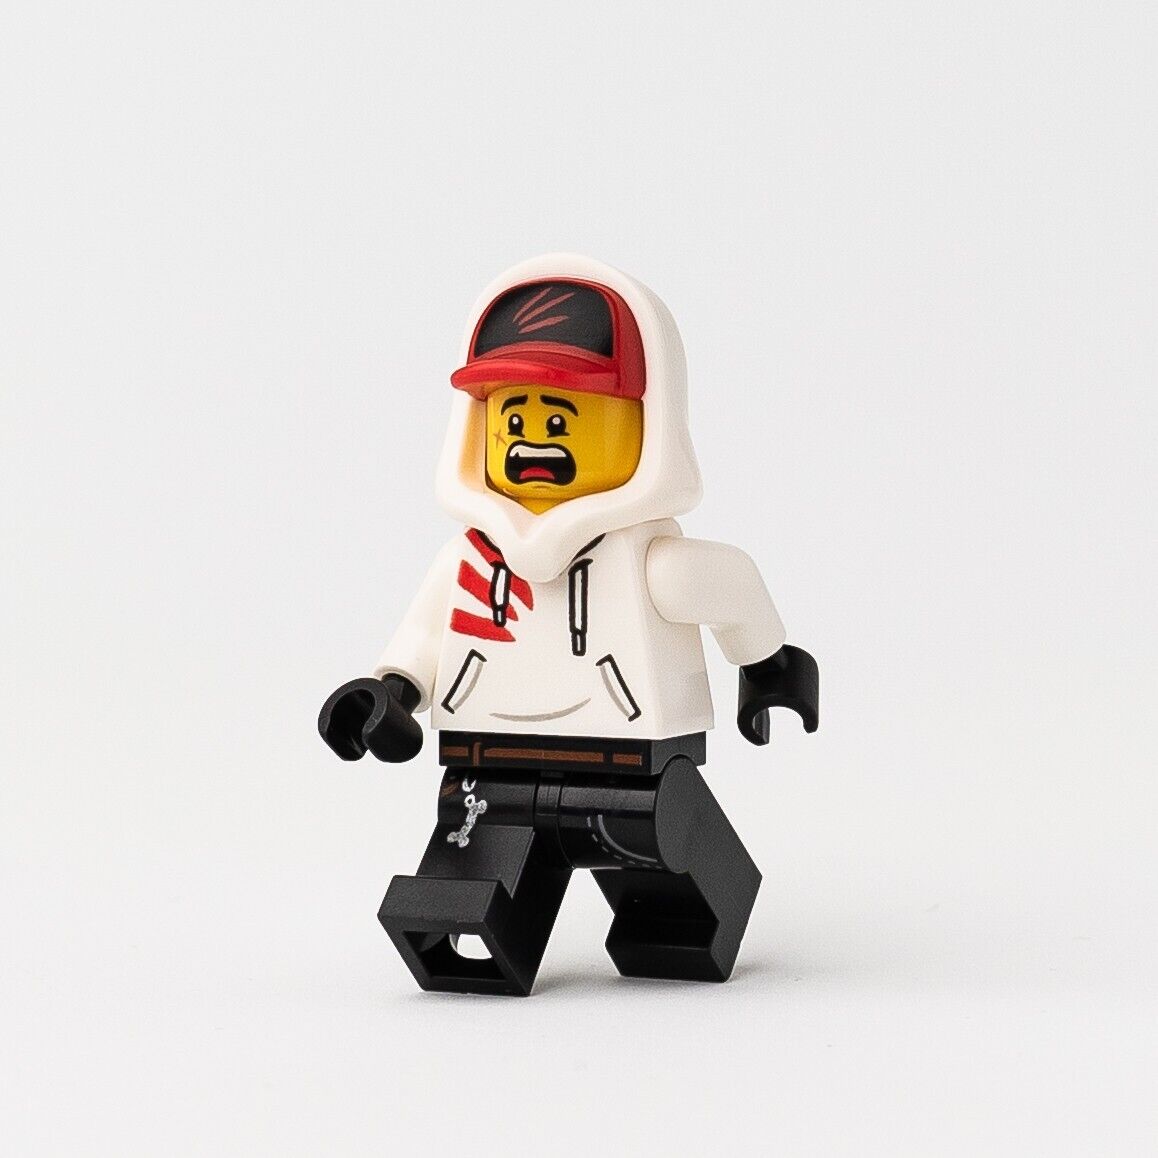 New LEGO Jack Davids - White Hoodie with Cap and Hood Minifigure - (hs009)